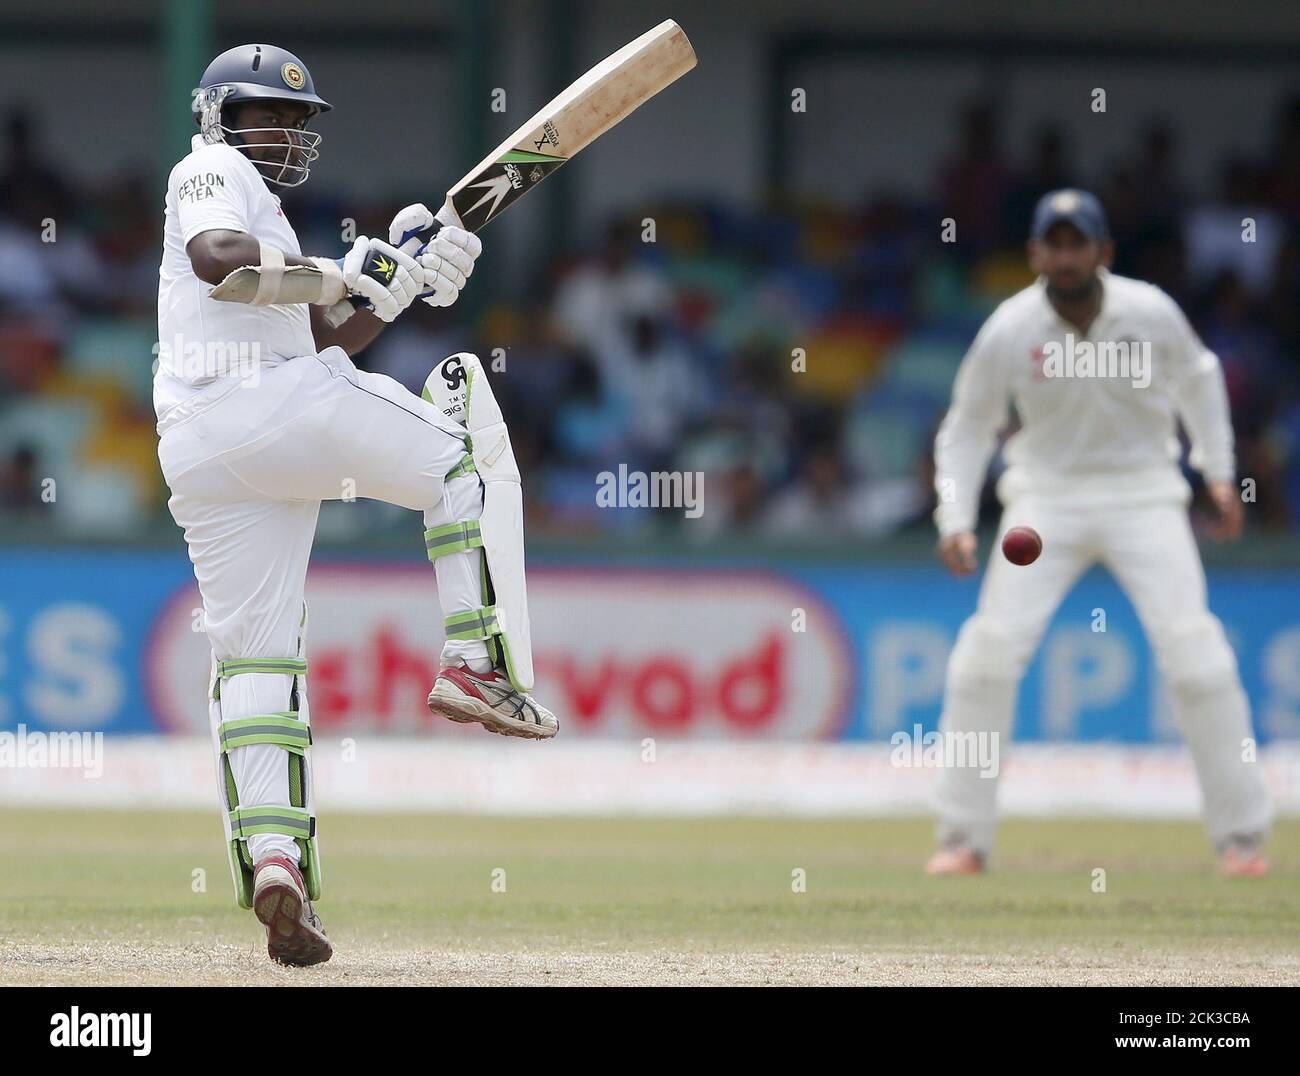 Sri Lanka's Rangana Herath hits a boundary during the third day of their third and final test cricket match against India in Colombo, August 30, 2015. REUTERS/Dinuka Liyanawatte Stock Photo